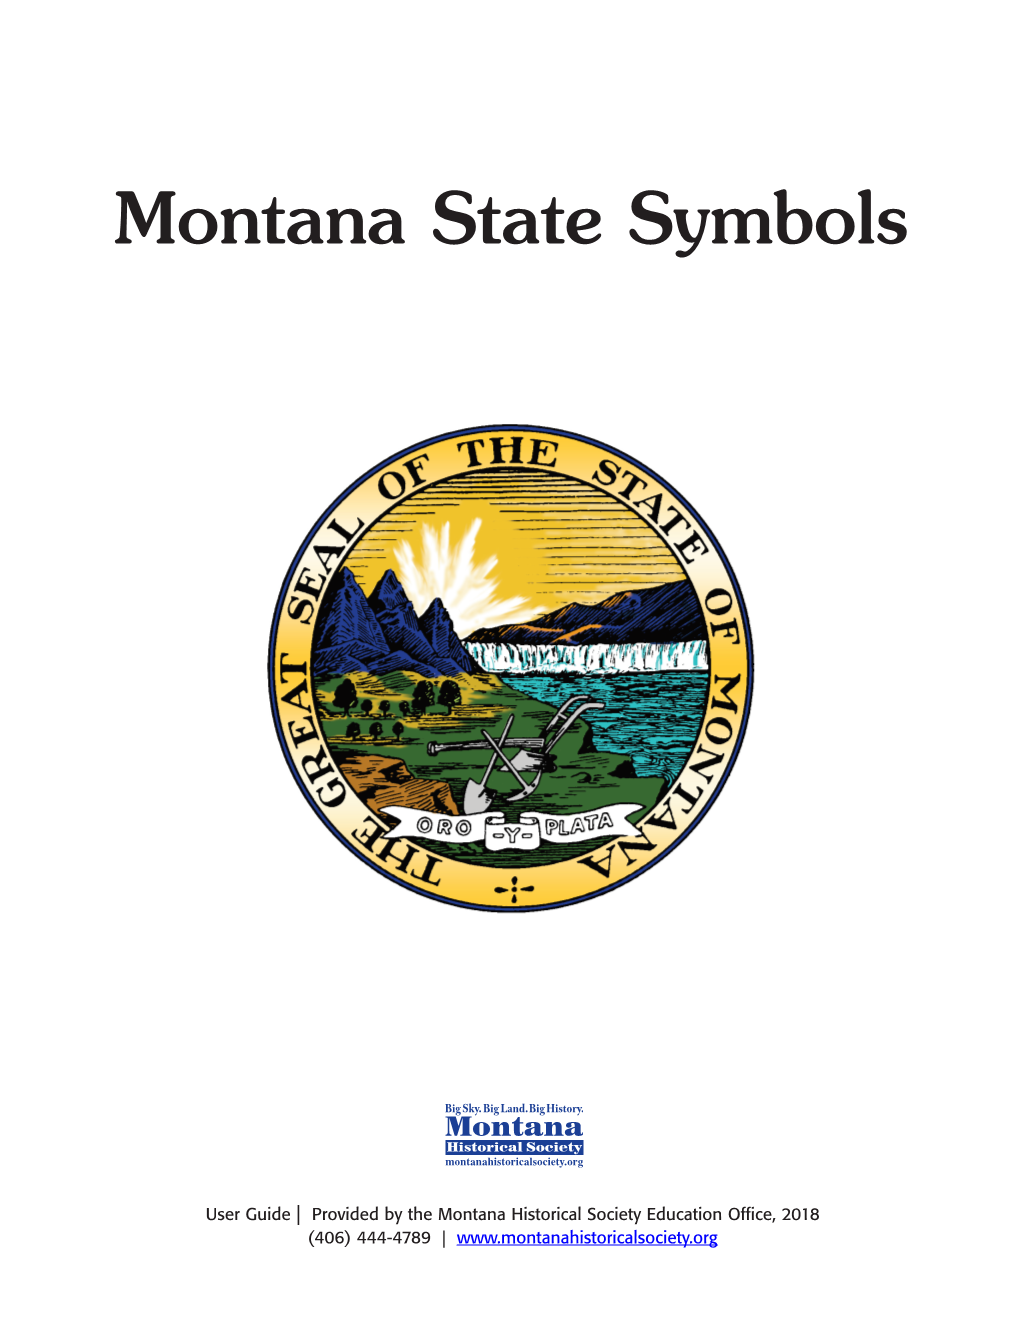 Montana State Symbols Footlocker Contents (Continued)